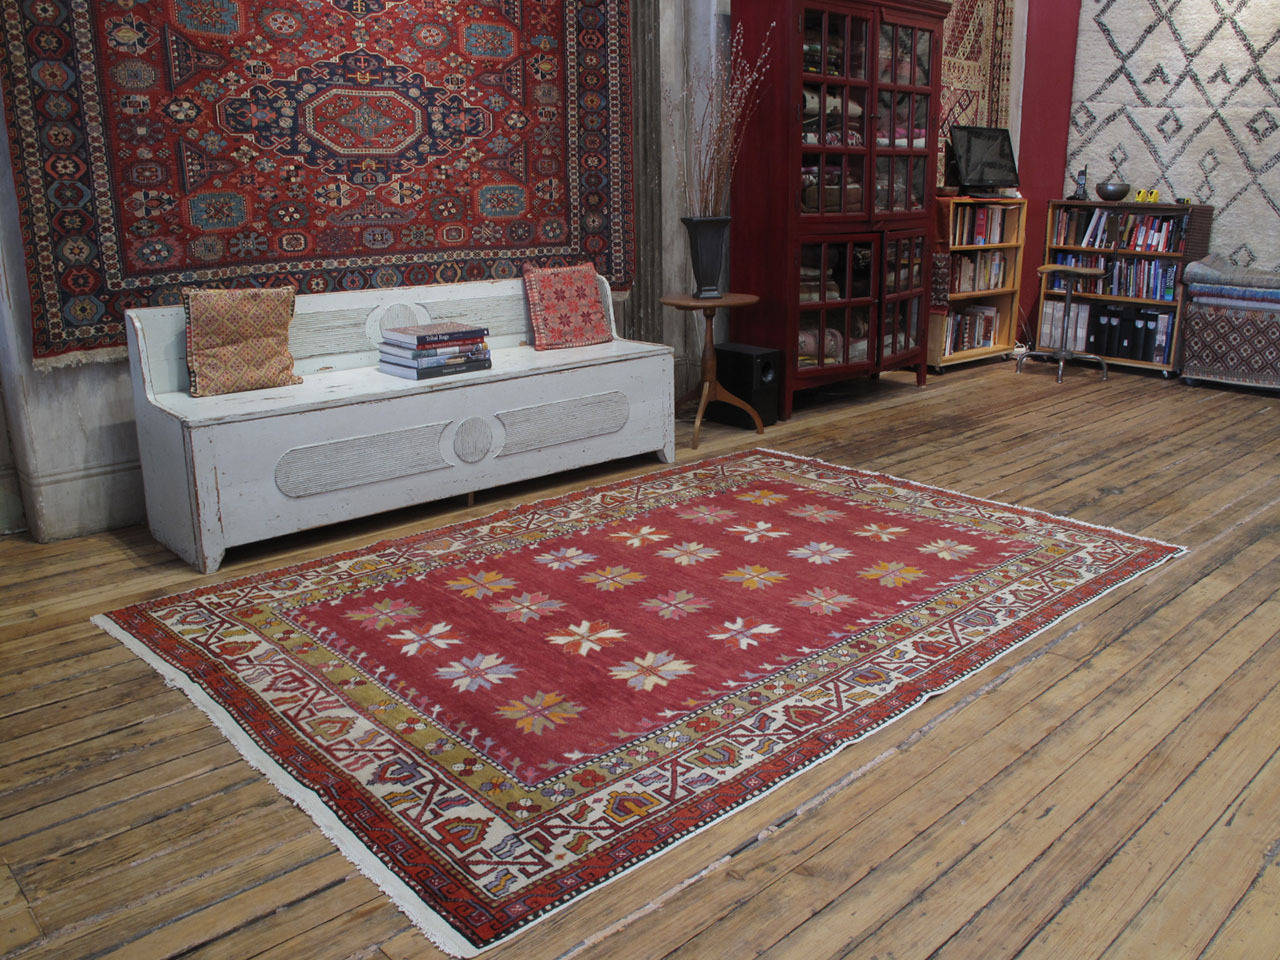 Yuntdag rug. A beautiful old tribal rug from Western Turkey, a type that has become increasingly hard-to-find. Large stylized flowers in the field are surrounded by a border of scrolling vine. Rugs like this are the last link of a centuries-old